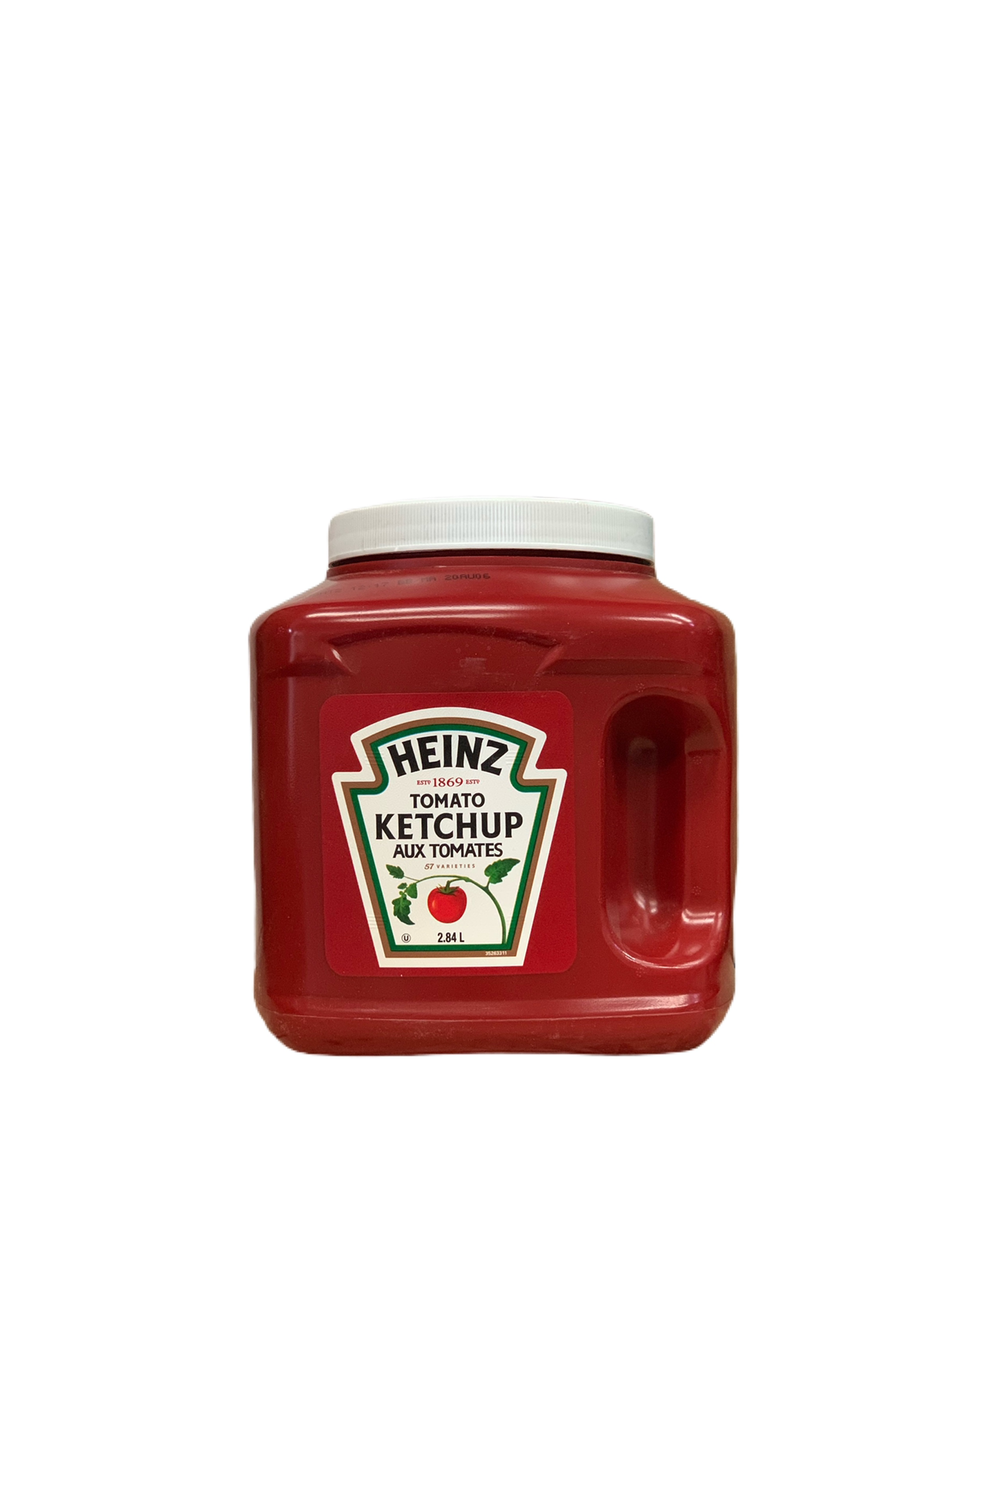 Heinz Ketchup 2.15ltr (catering Tub)